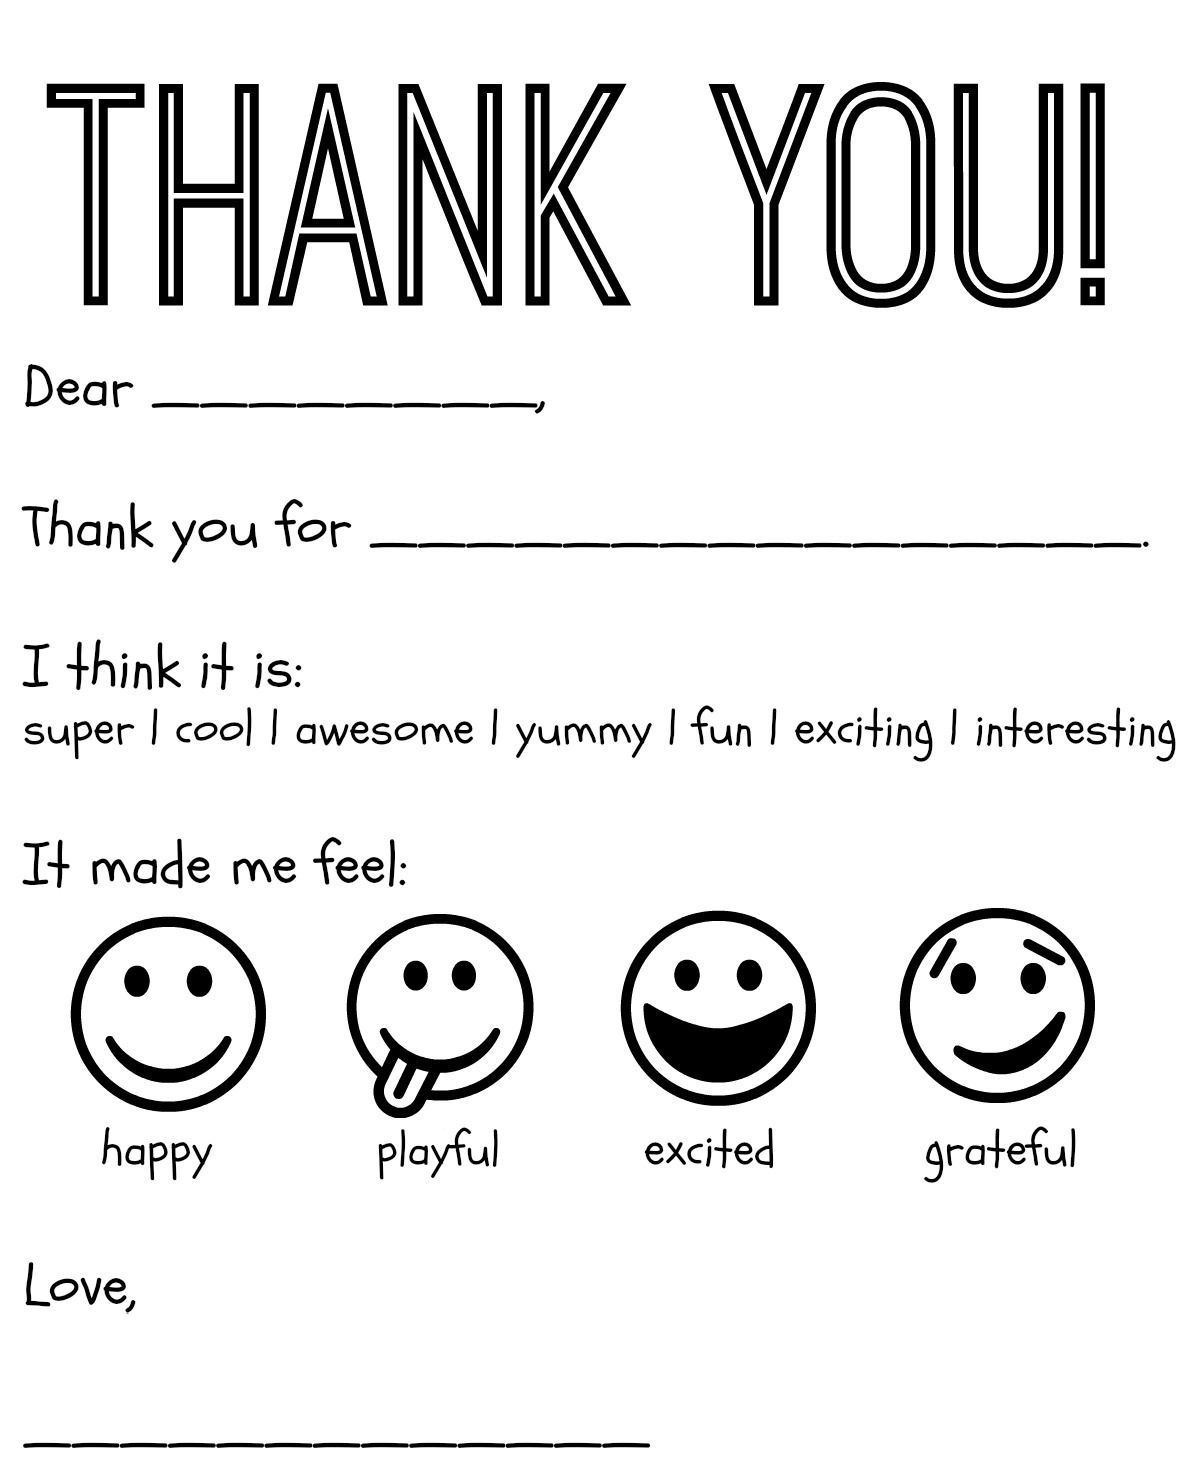 Free Printable Kids Thank You Cards To Color | Thank You Card - Free Printable Thank You Cards Black And White